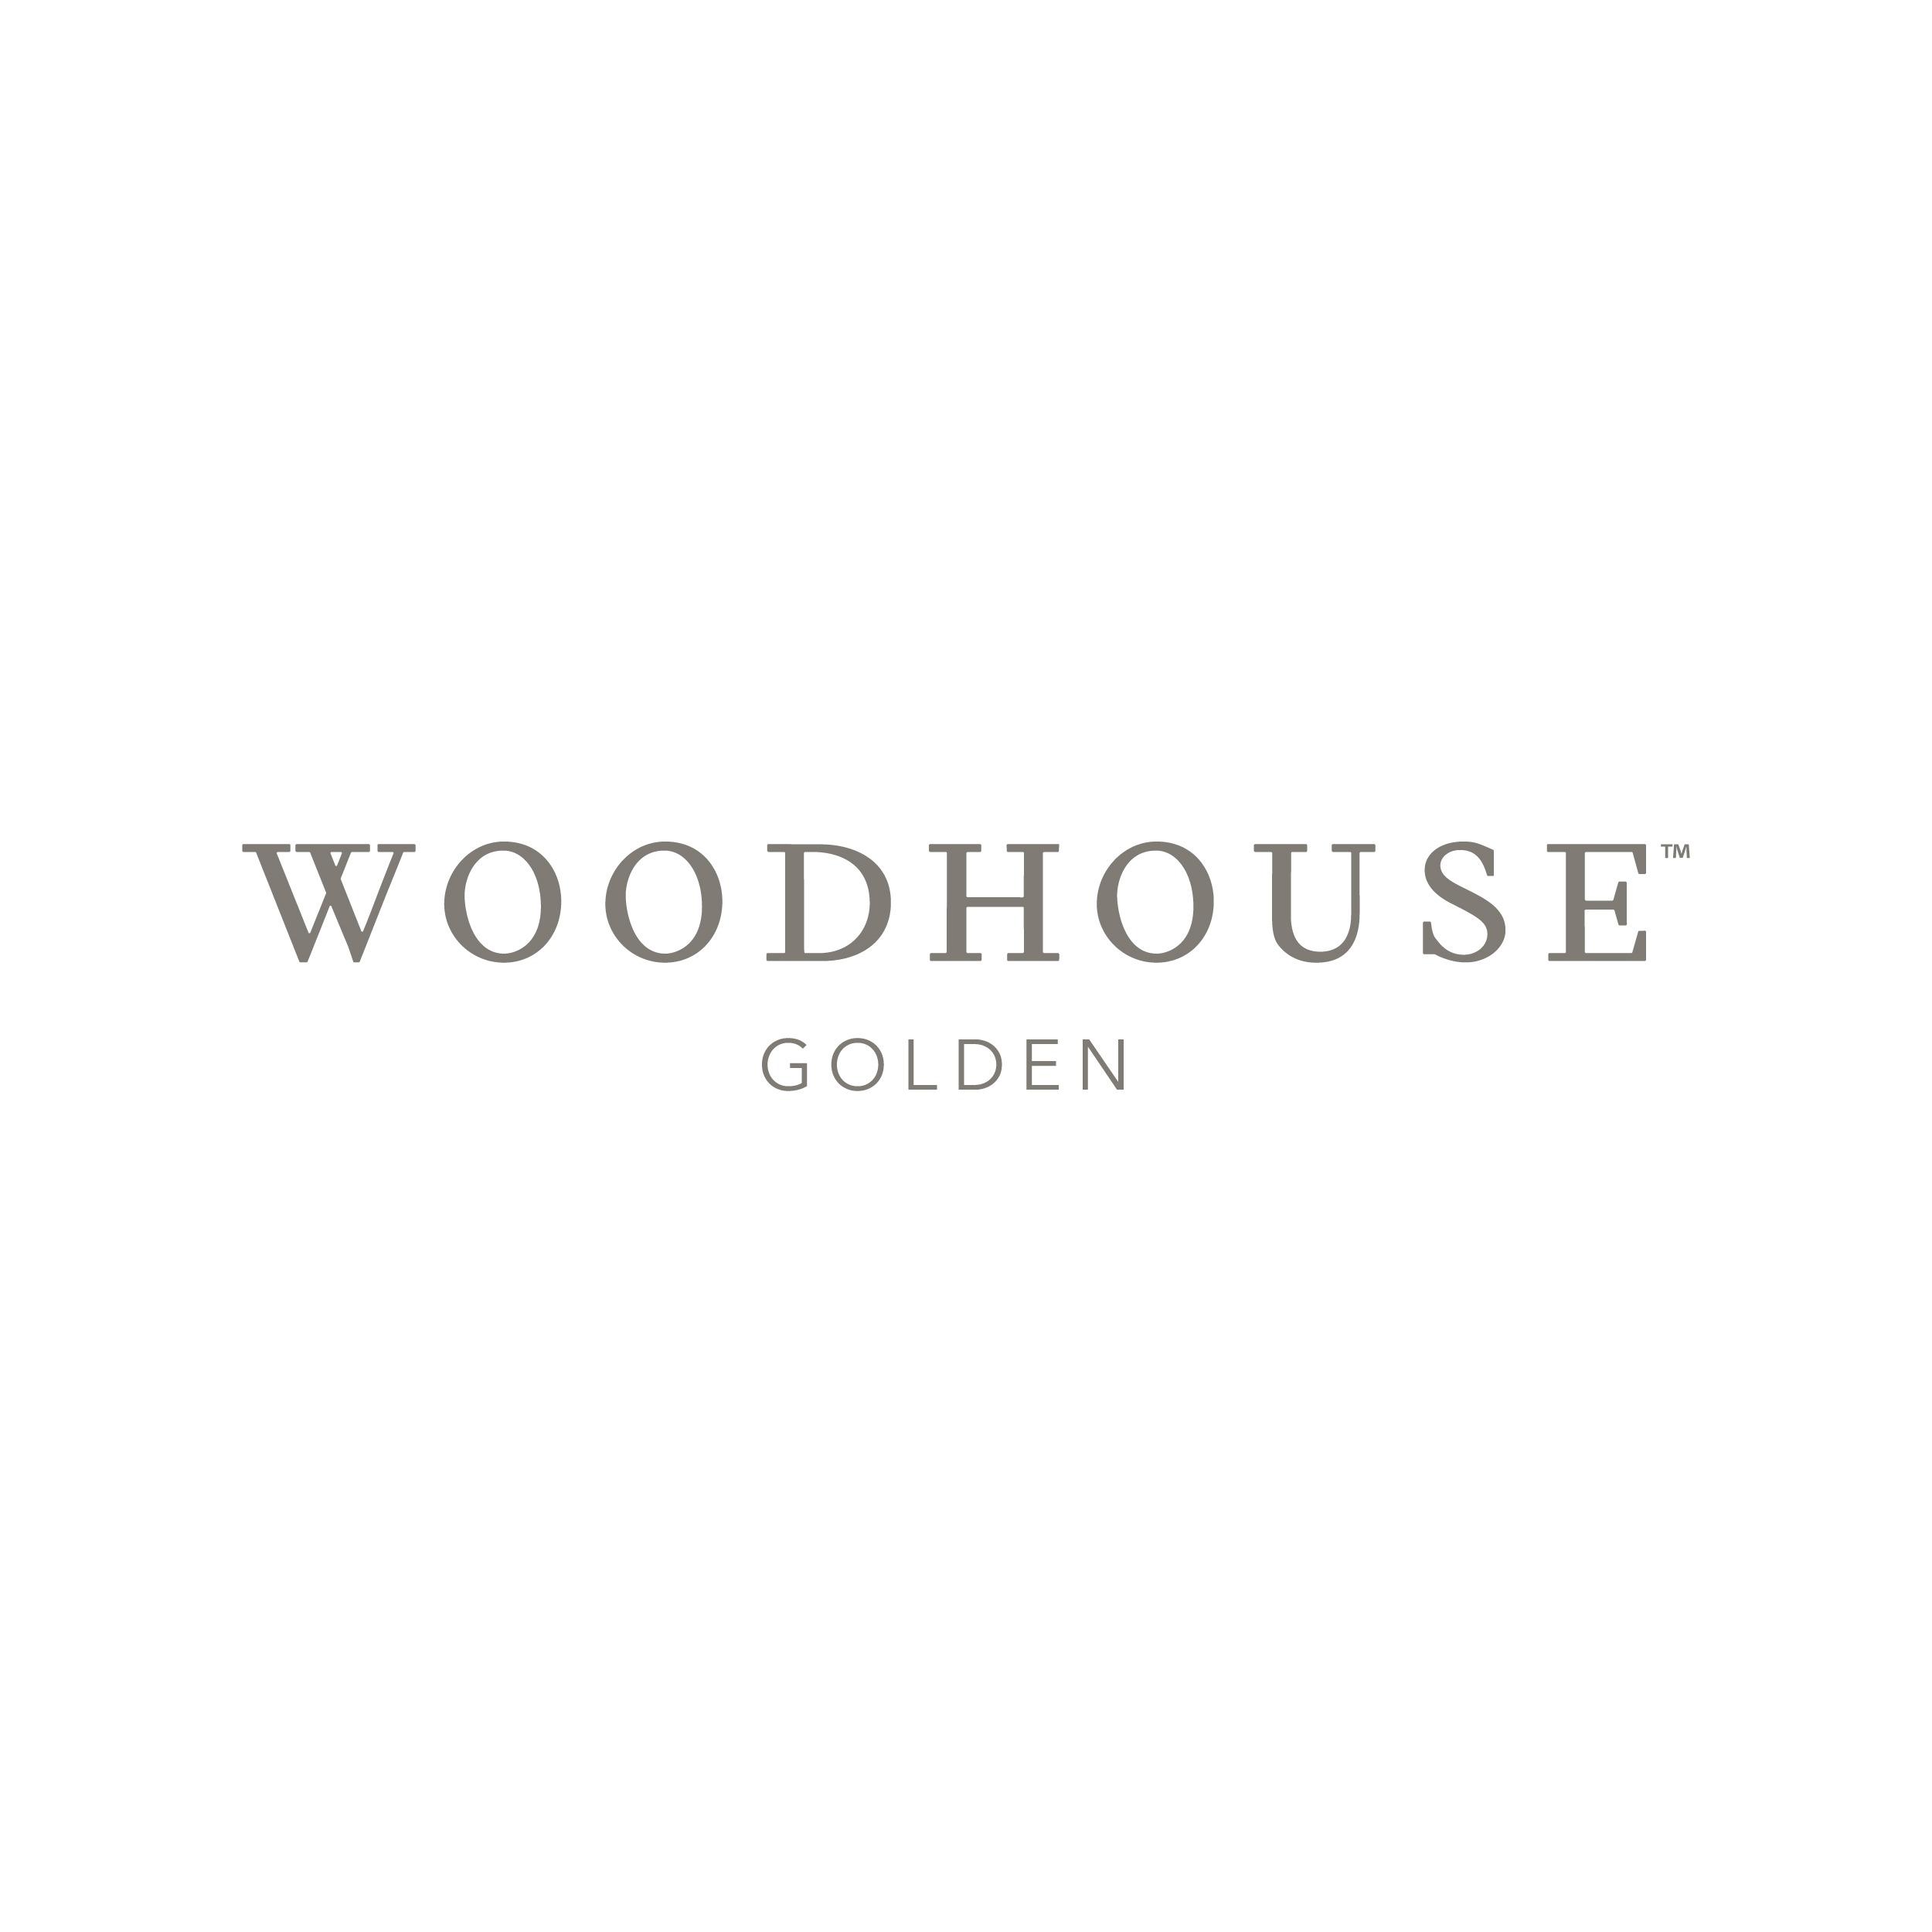 Woodhouse Spa - Golden